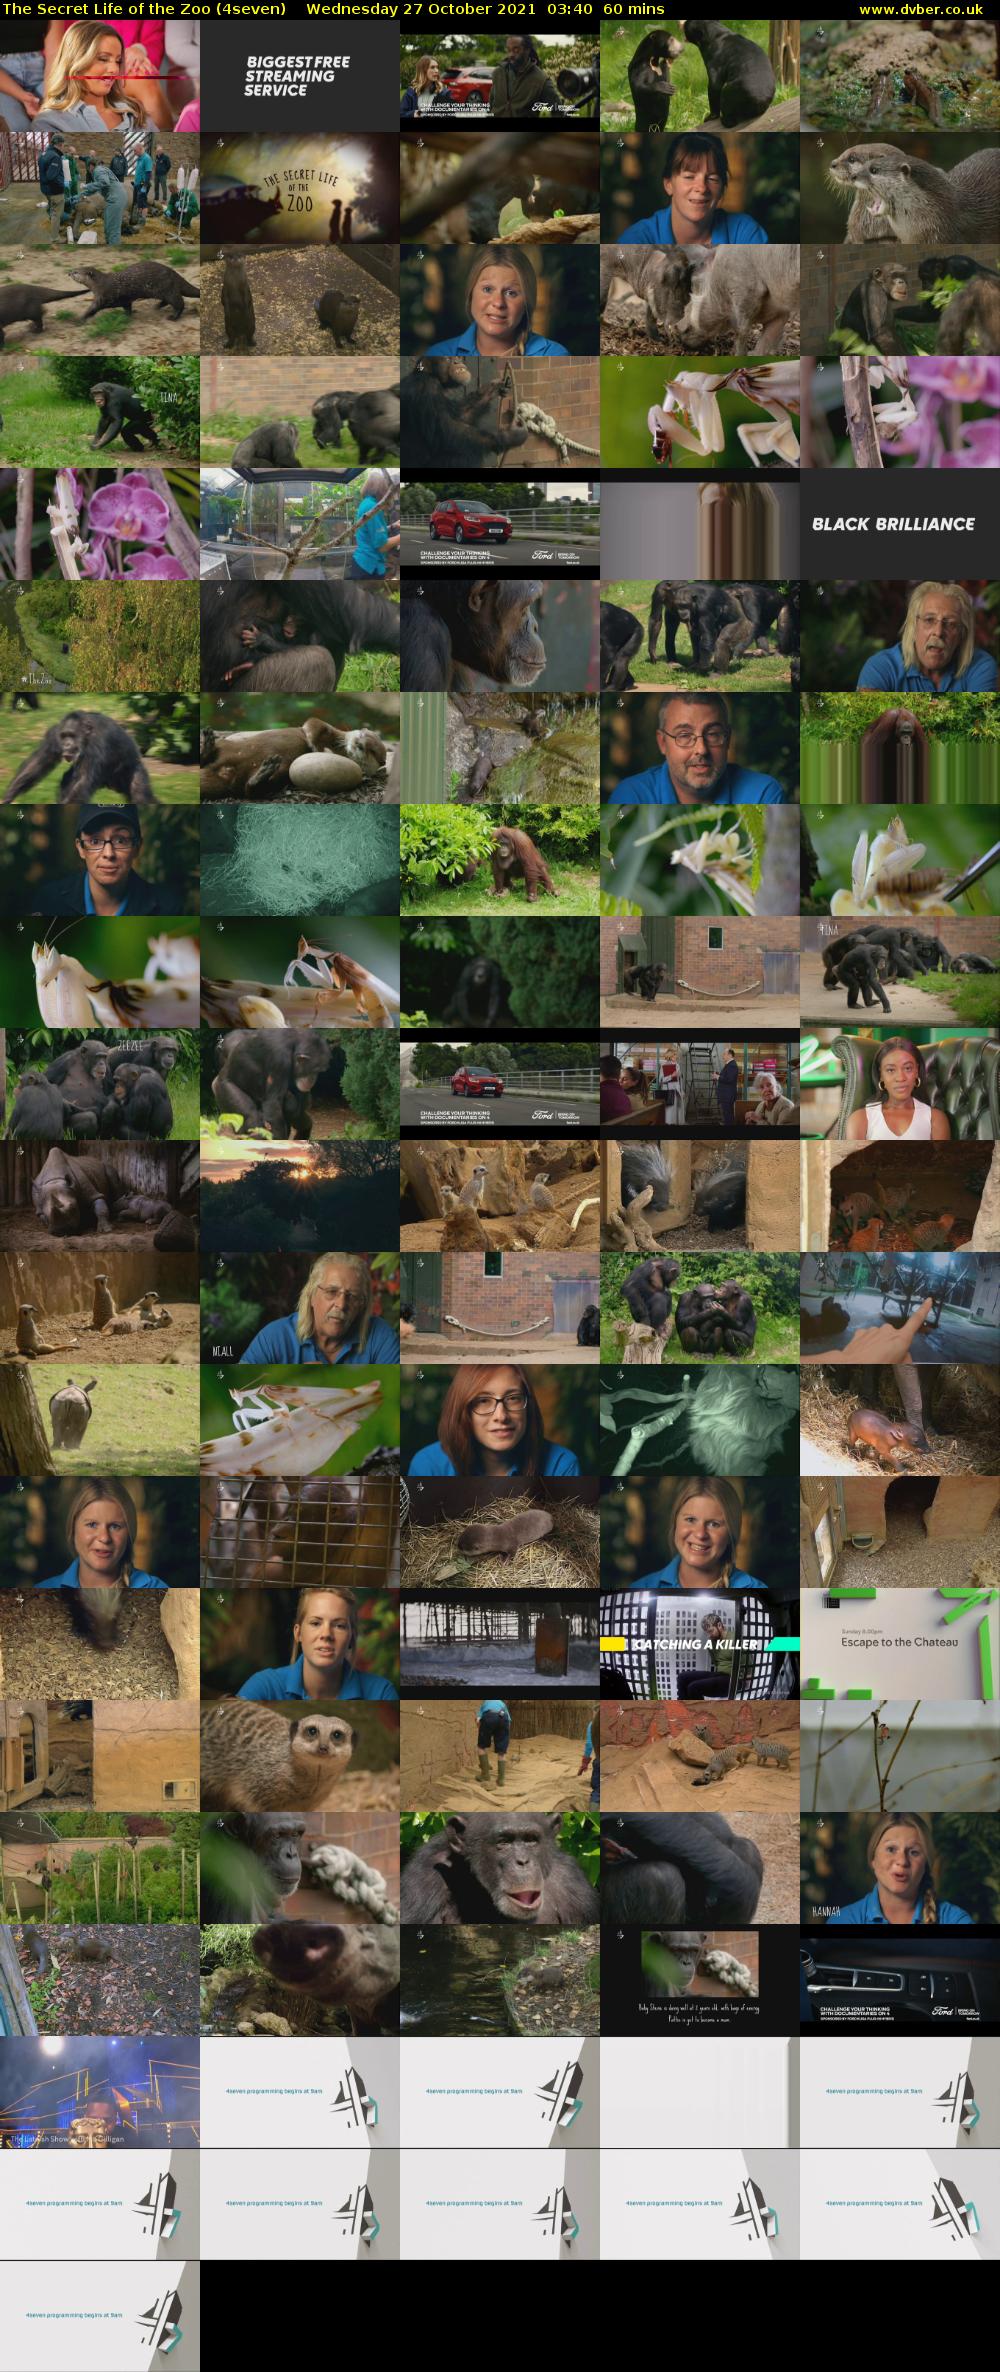 The Secret Life of the Zoo (4seven) Wednesday 27 October 2021 03:40 - 04:40